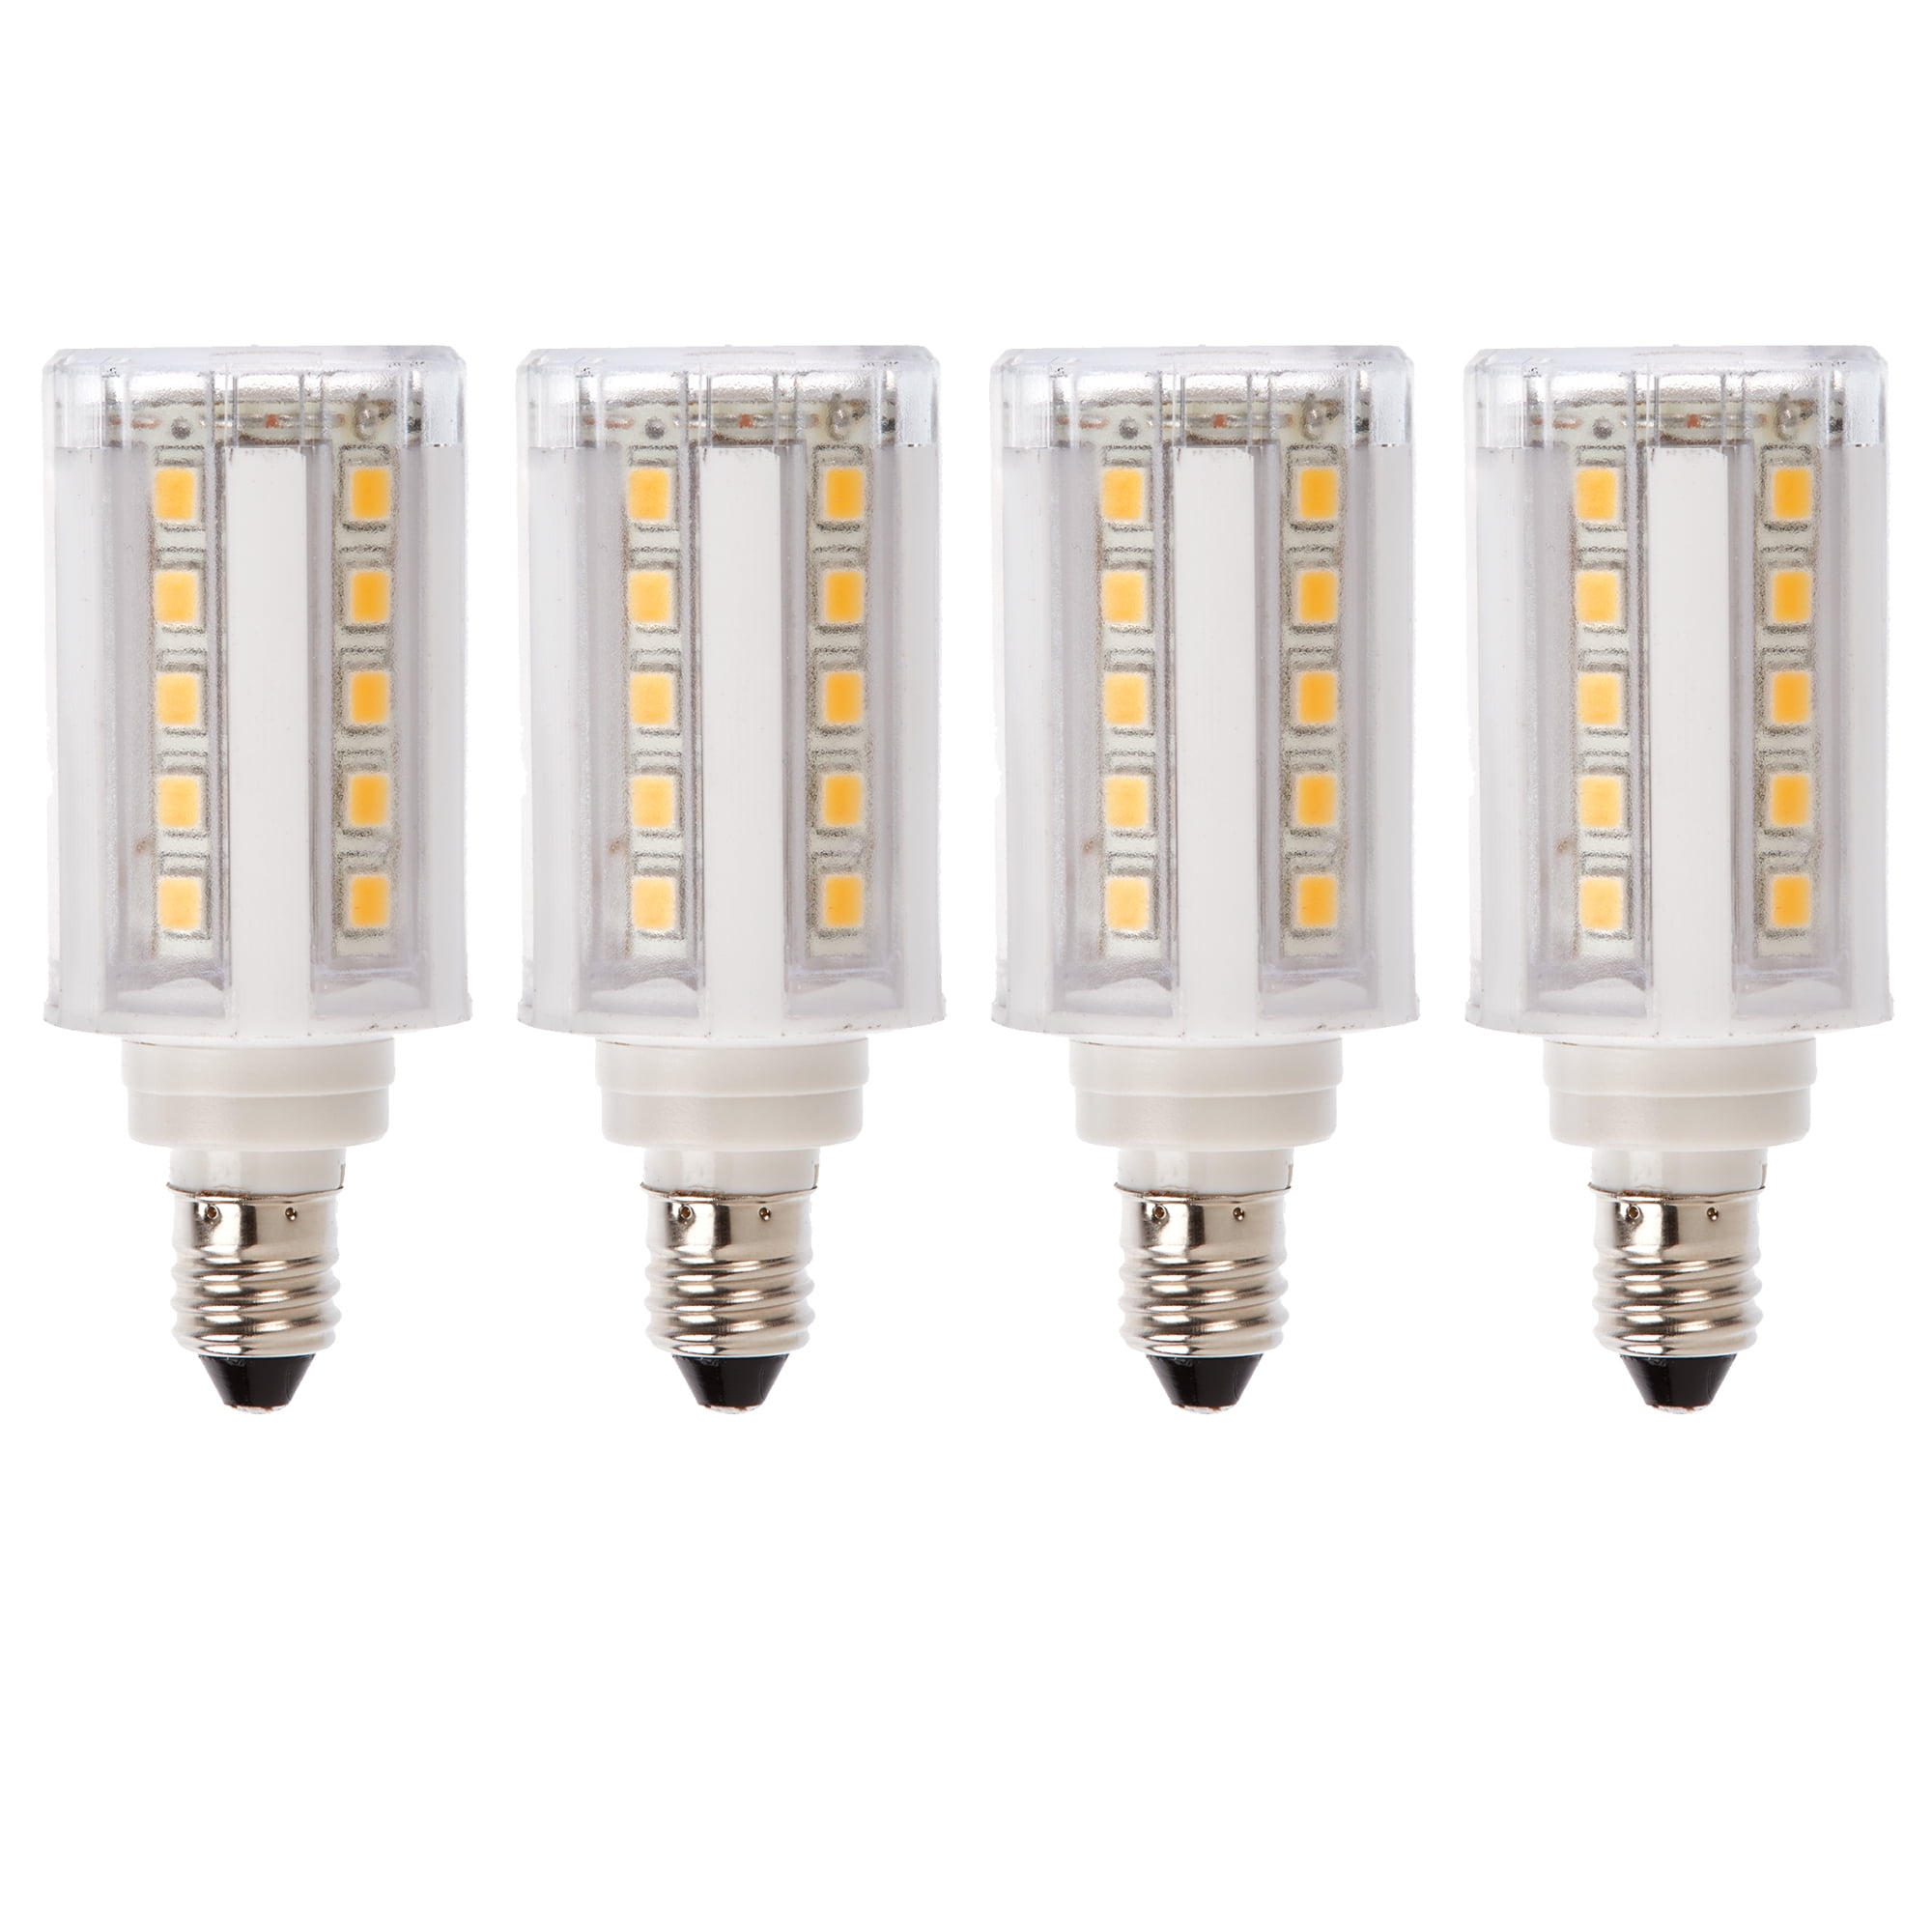 75W or 100W Equivalent Halogen Replacement Lights Replaces T4 /T3 JD Type Clear e11 Light Bulb Sratgd 1000 Lumens Daylight 6000K Dimmable Mini Candelabra Base 5-Pack AC110V/ 120V/ 130V E11 led Bulb 